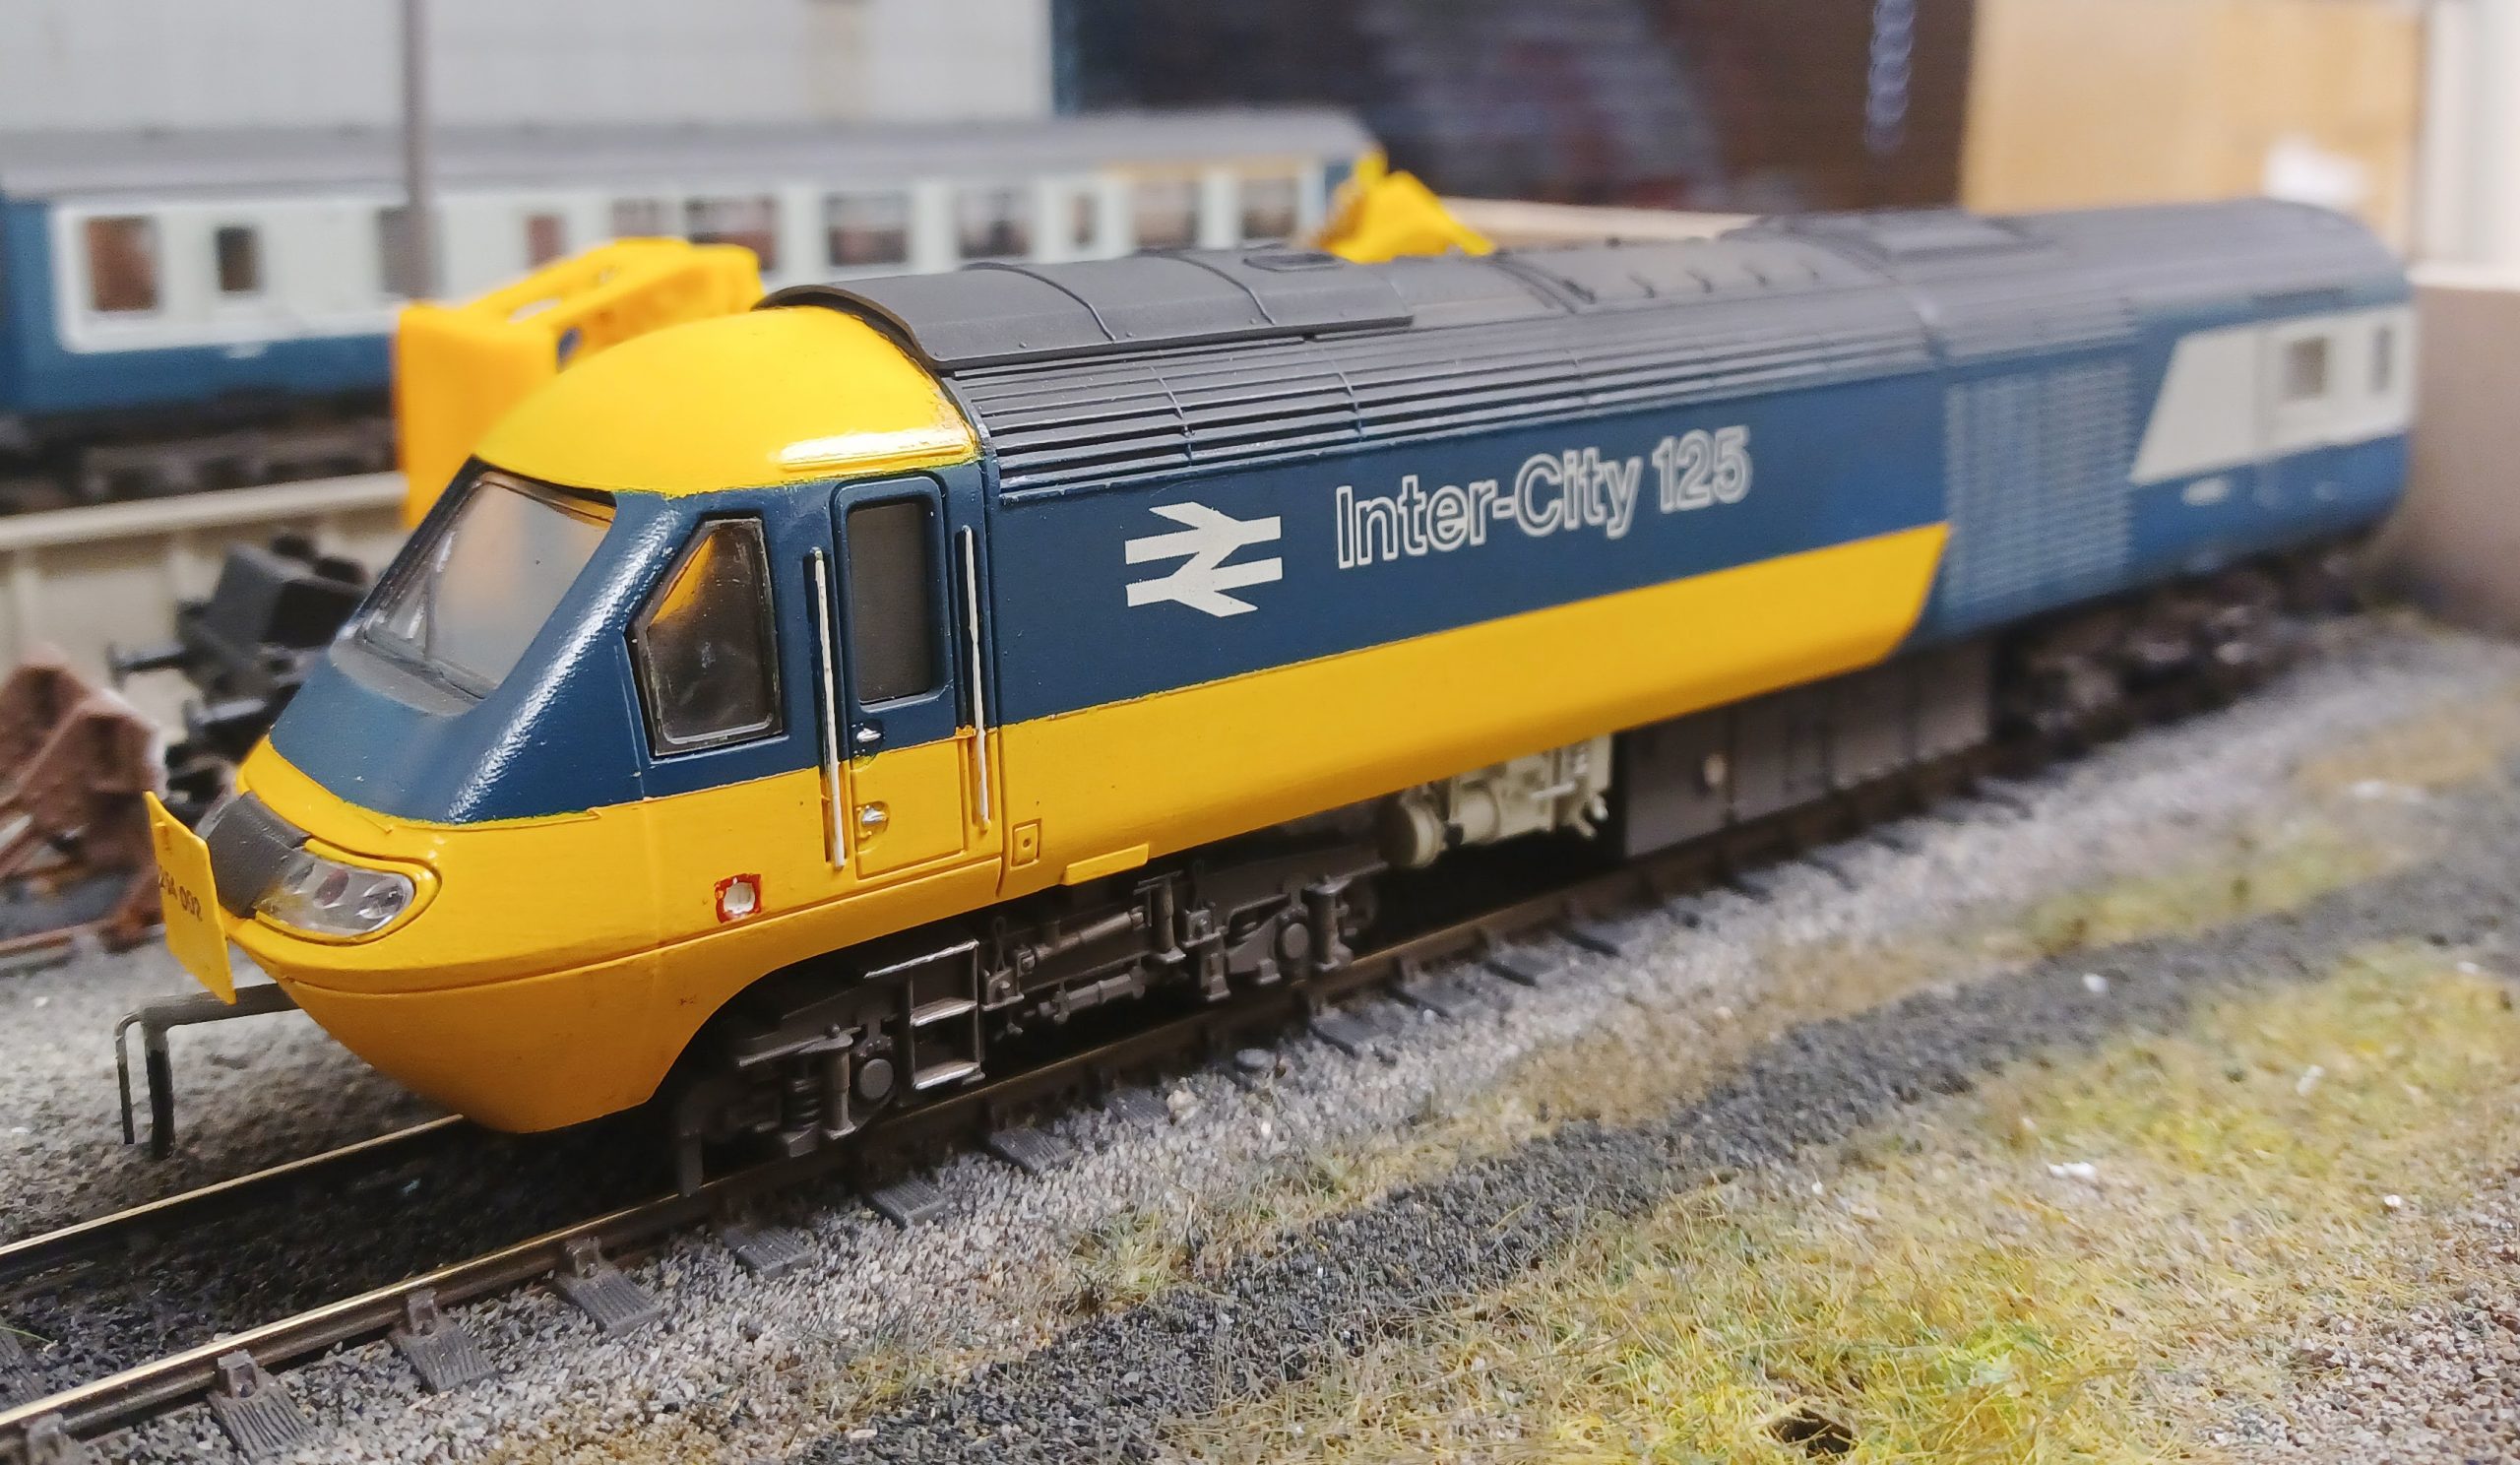 Lima Class 43 HST power car with extra details.